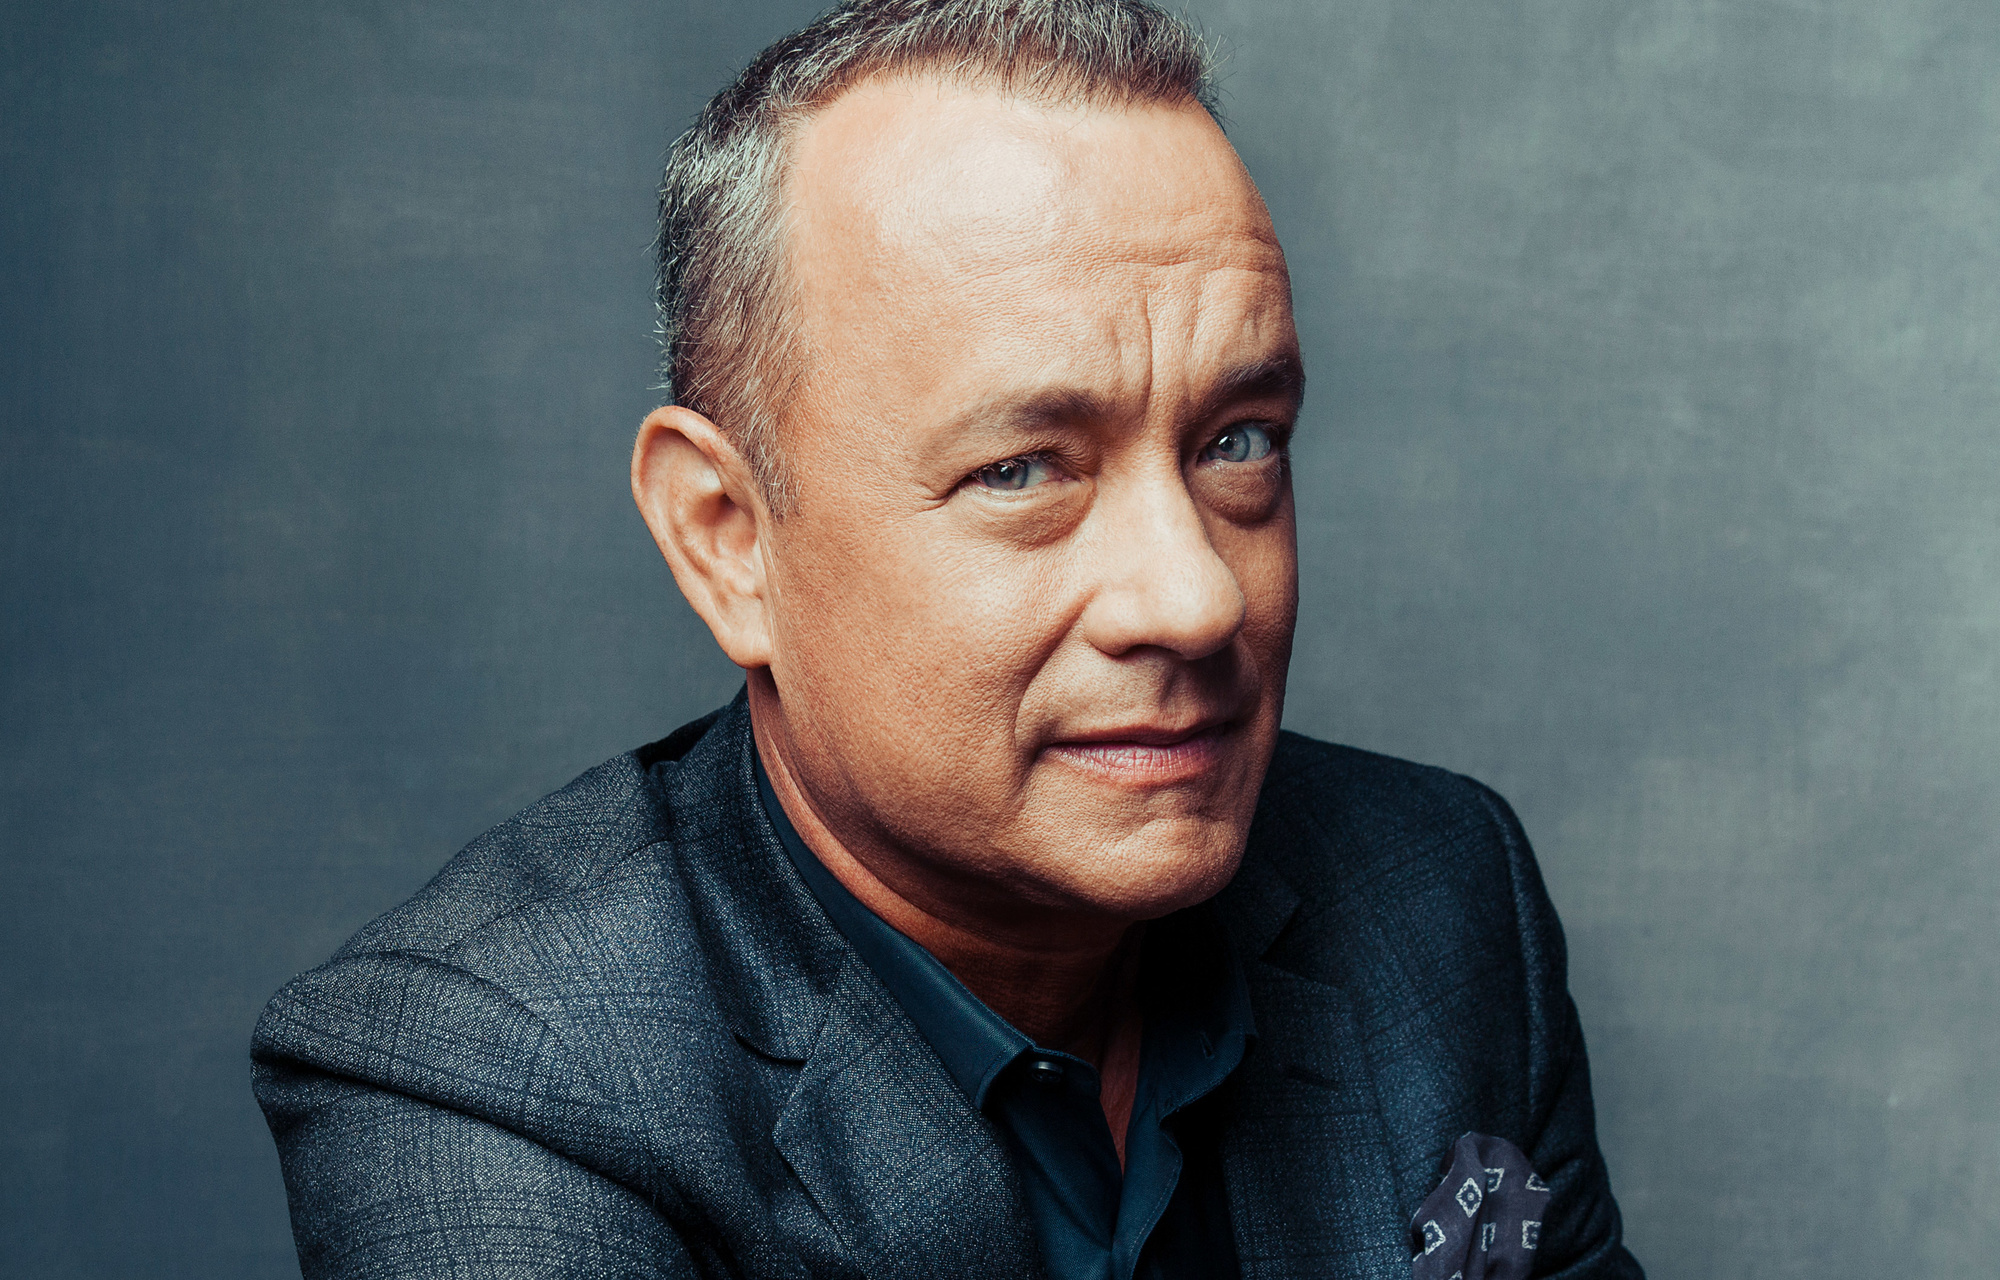 🔥 Match These Celebs on Tinder and We’ll Reveal the Type of Partner You Need ❤️ Tom Hanks